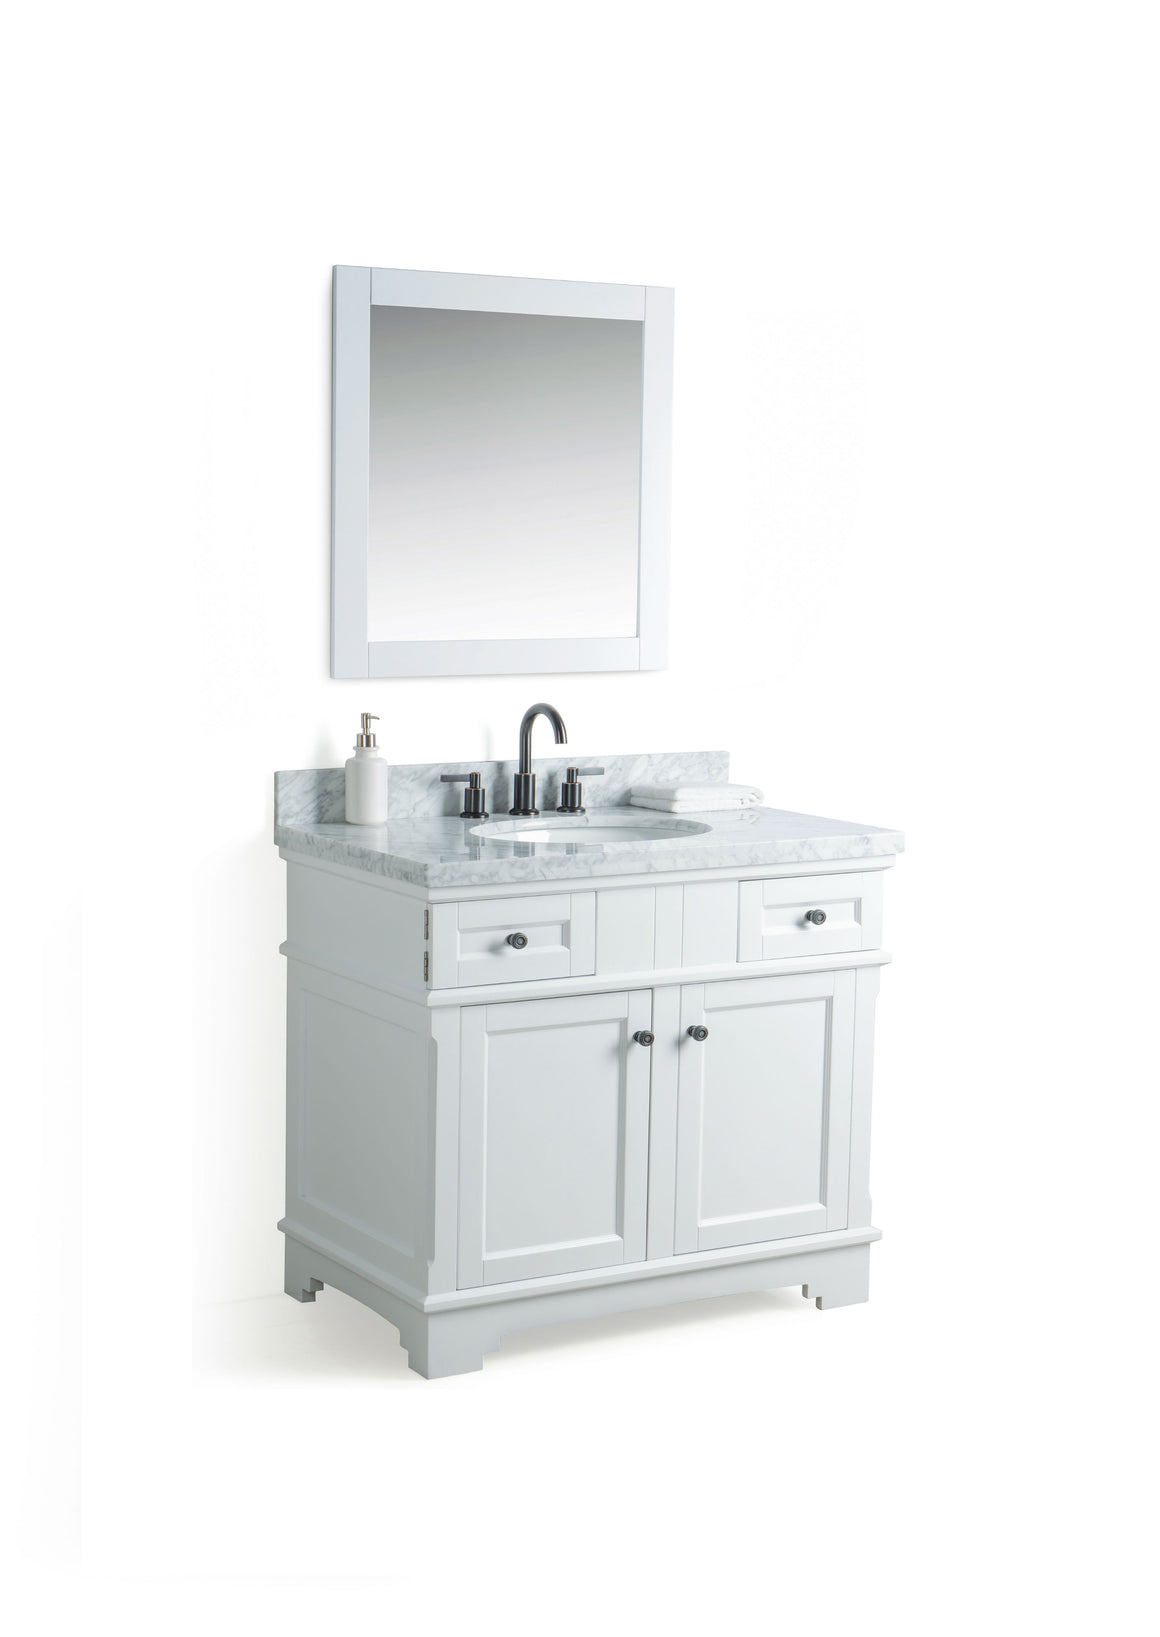 36" White Single Sink Bathroom Vanity with Marble Top and Faucet